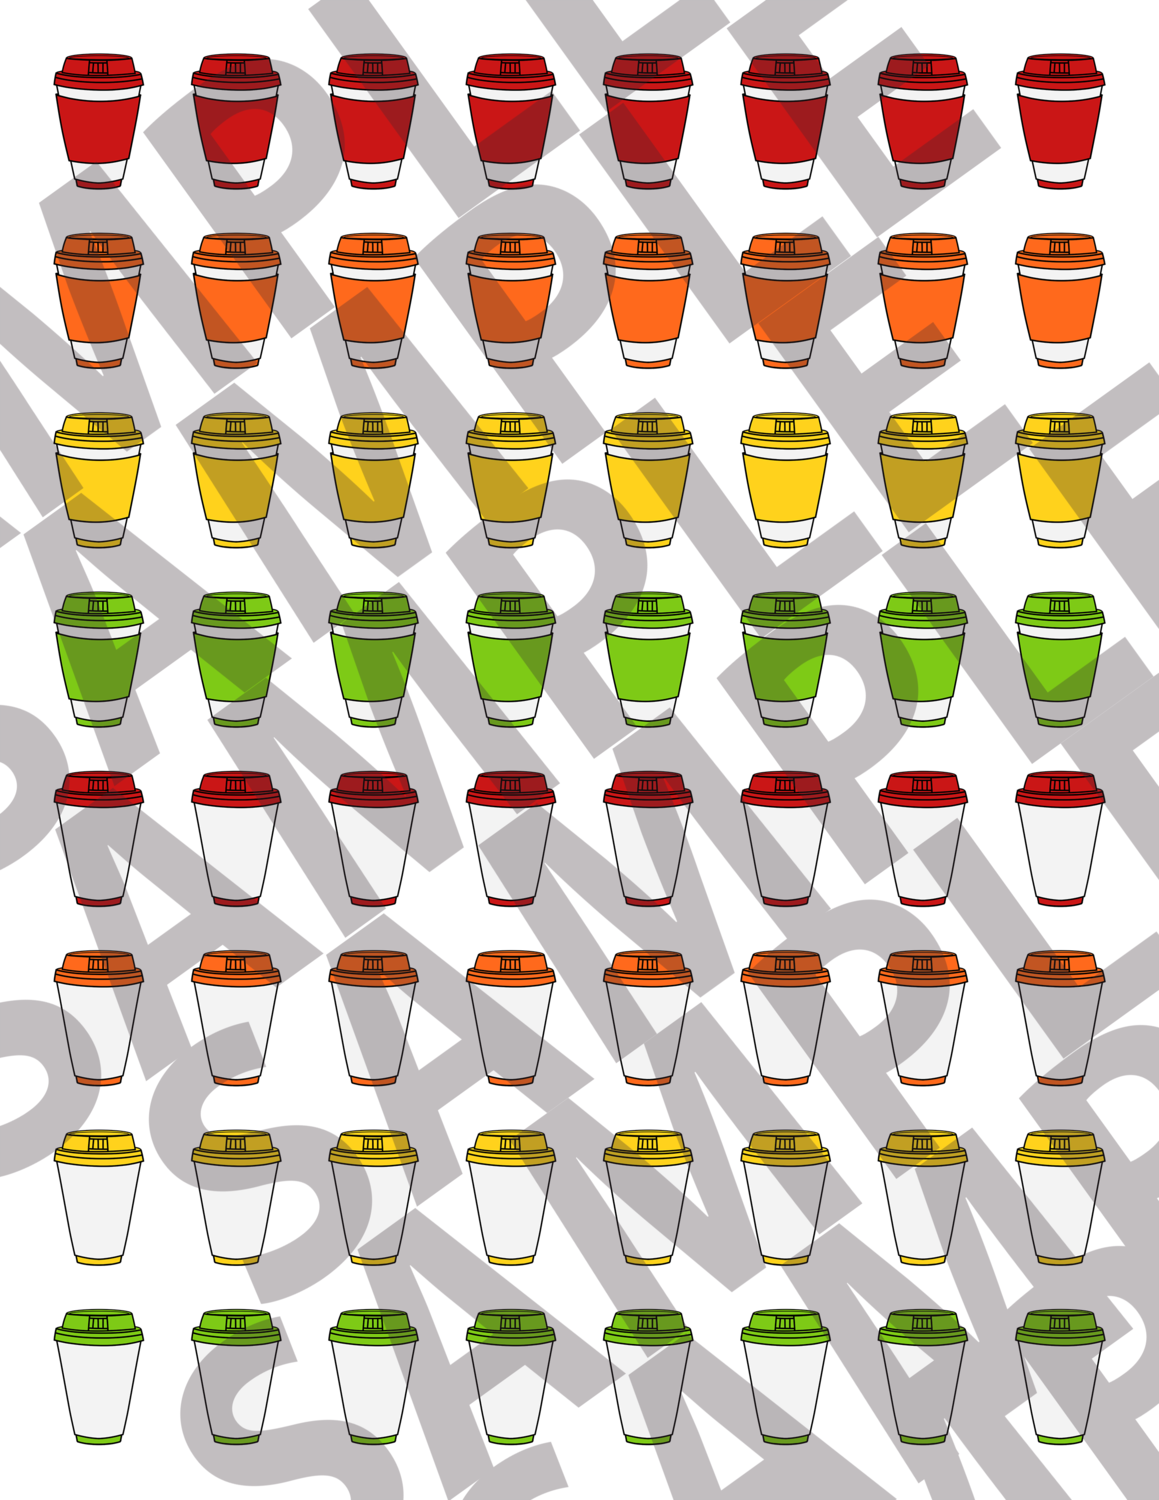 Apples & Oranges - 1 Inch Coffee Cups